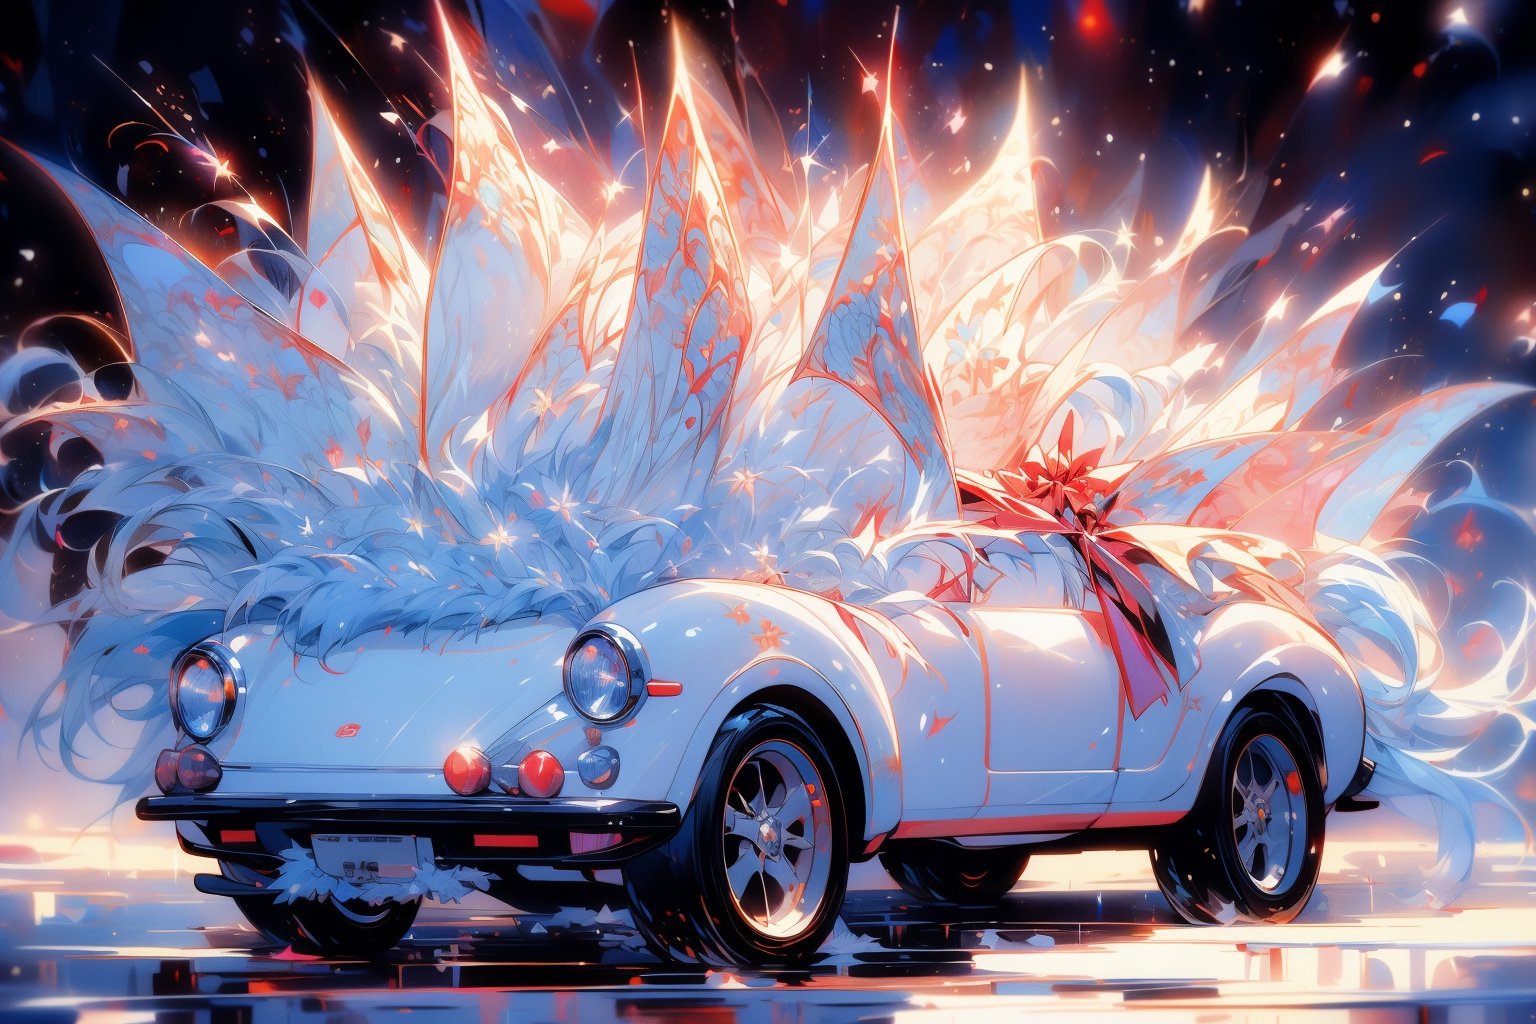 perspective view of a car, masterpiece, best quality, domestic_long-haired_cat, flat color, oil painting style, winter season, Christmas, snow, with colorful fireworks, flooded